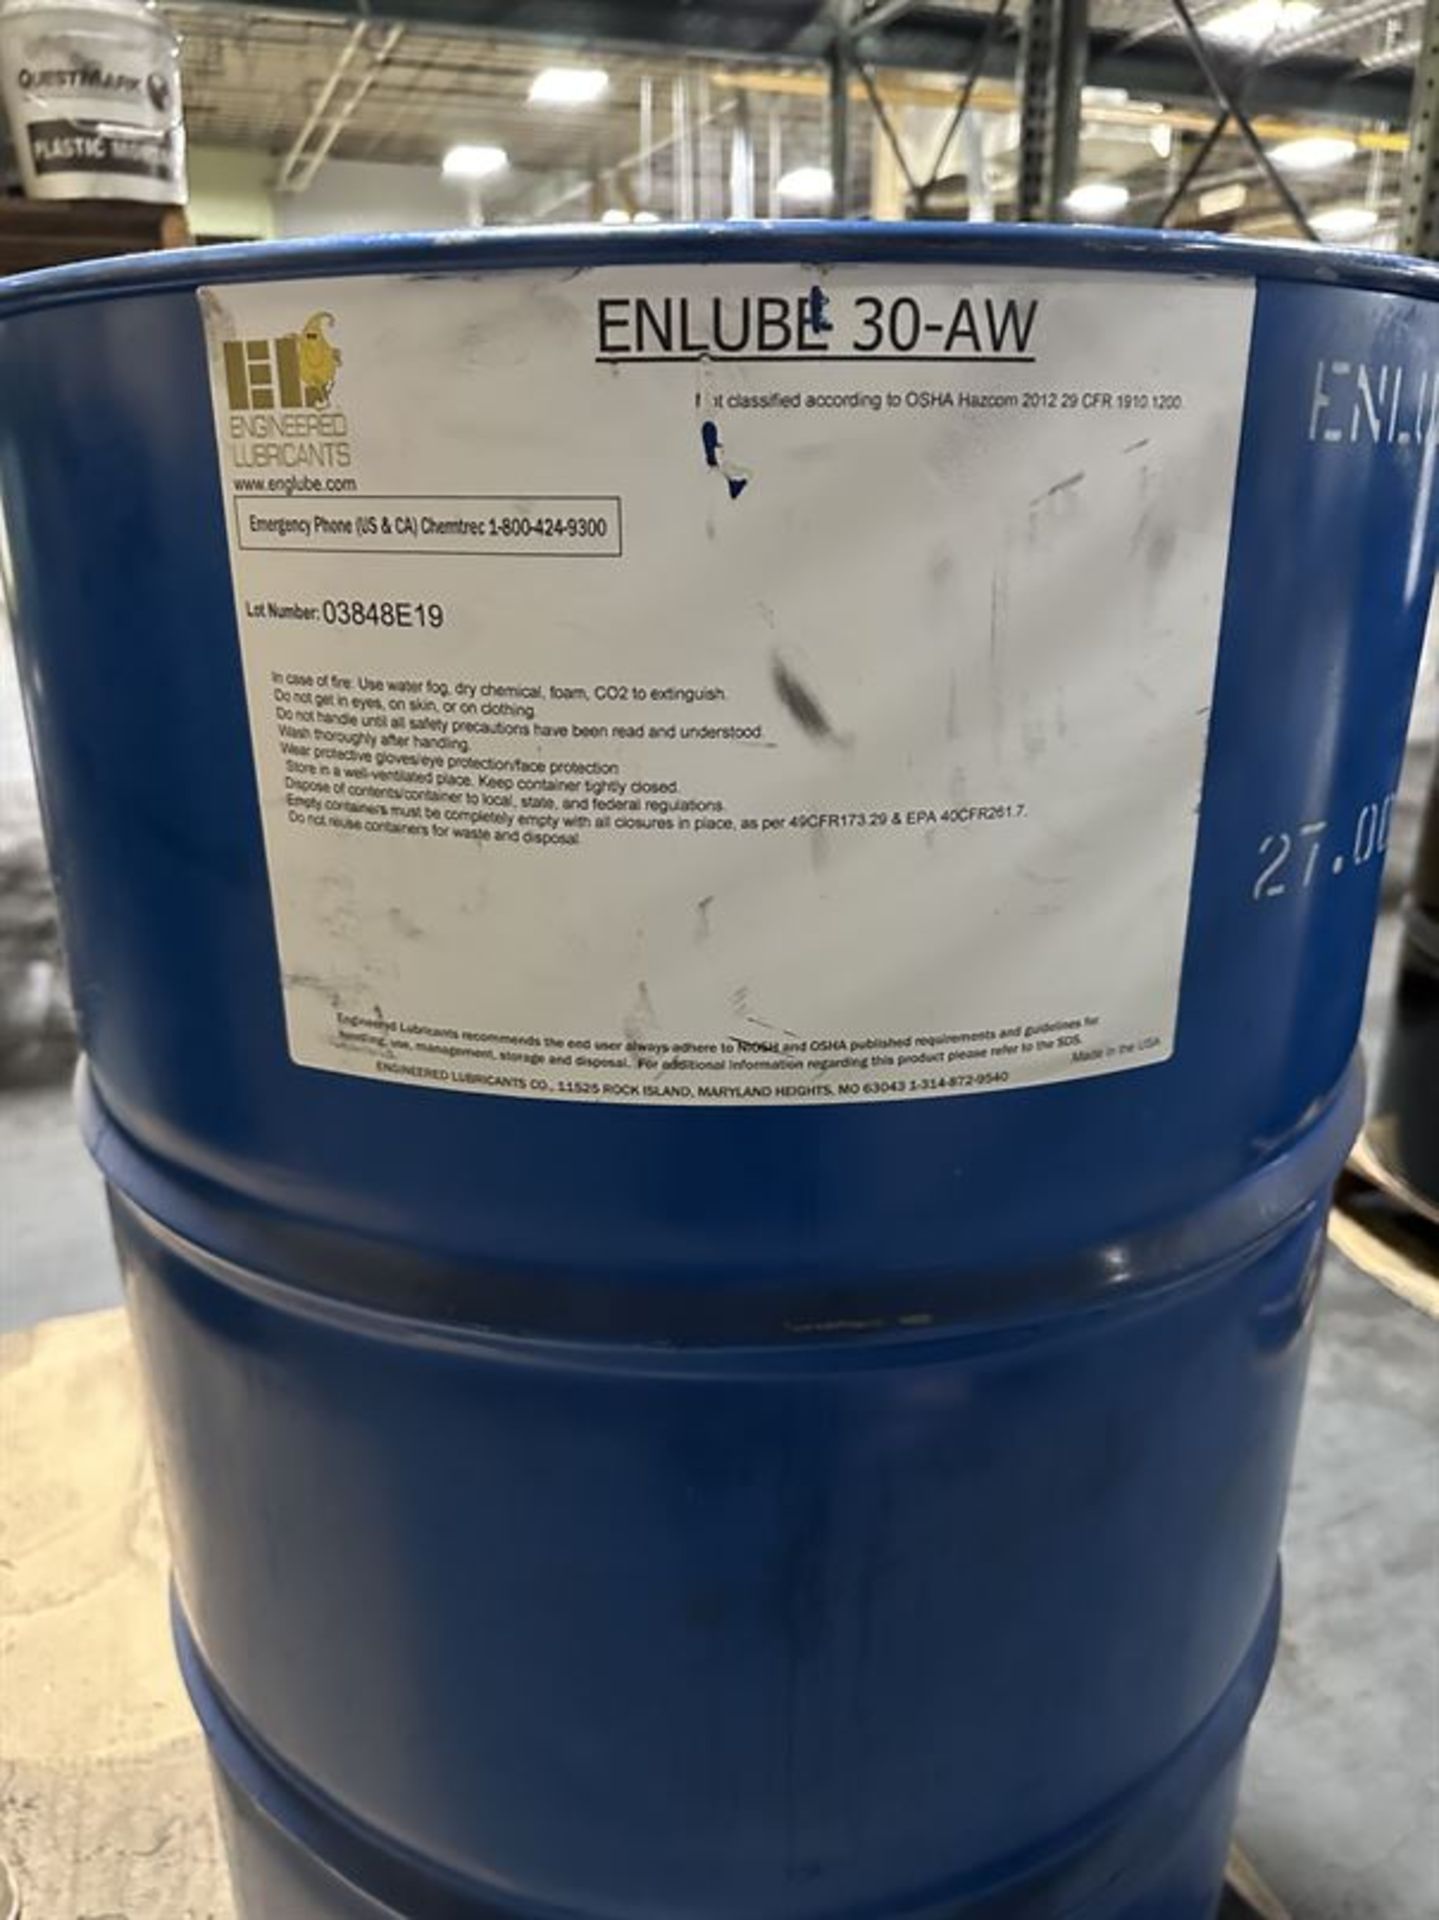 Factory Sealed 55 Gallon Drum Enlube 30-AE - Image 3 of 3